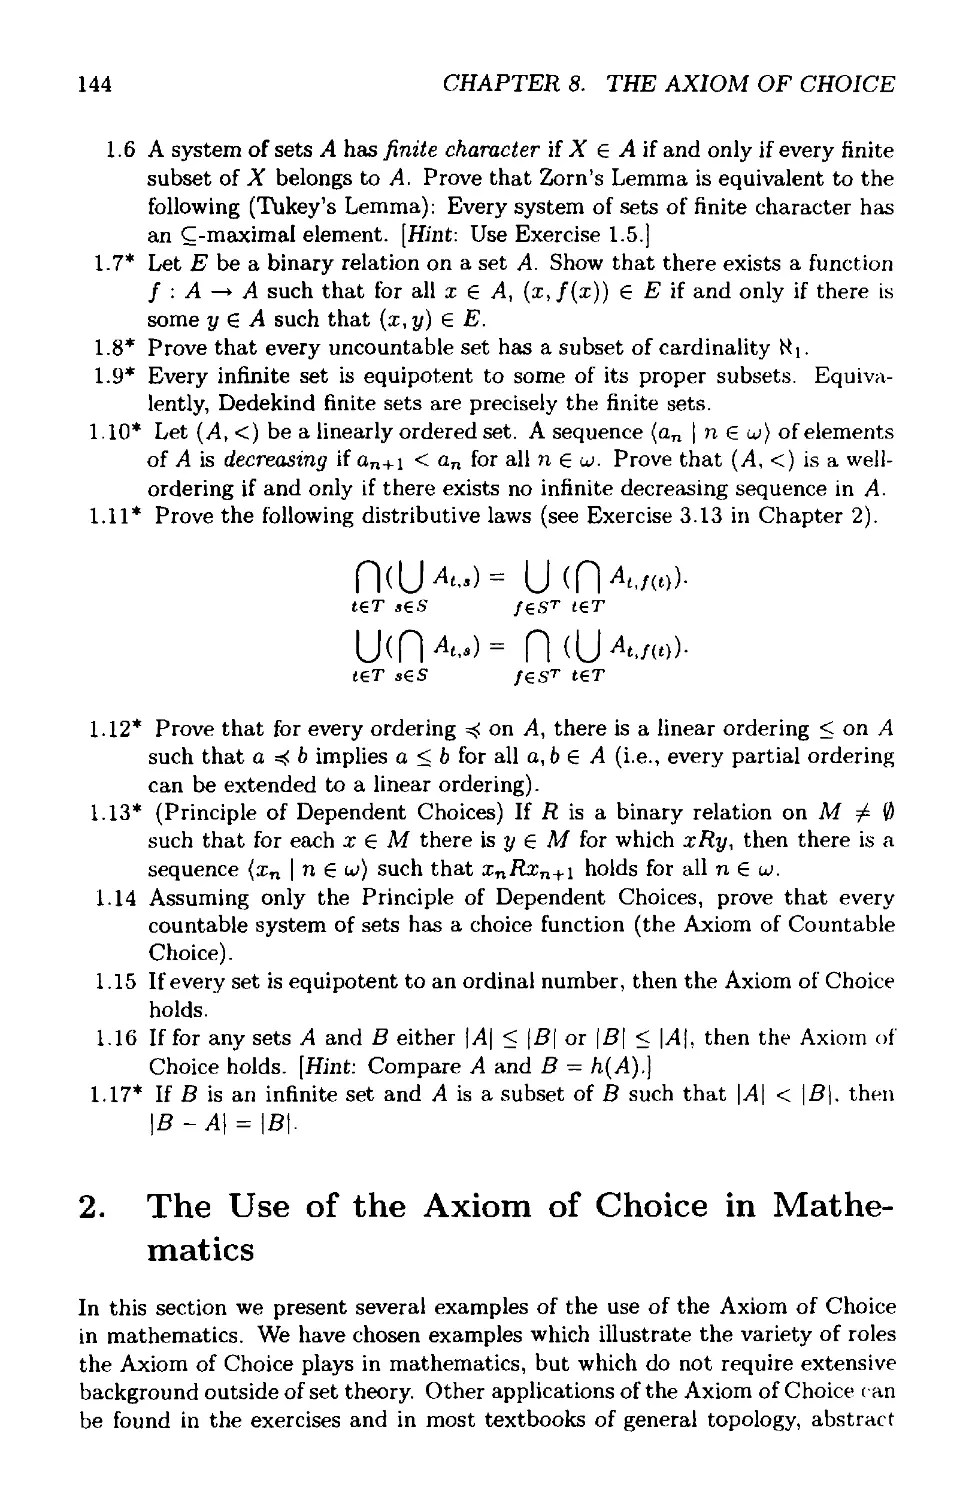 2 The Use of the Axiom of Choice in Mathematics